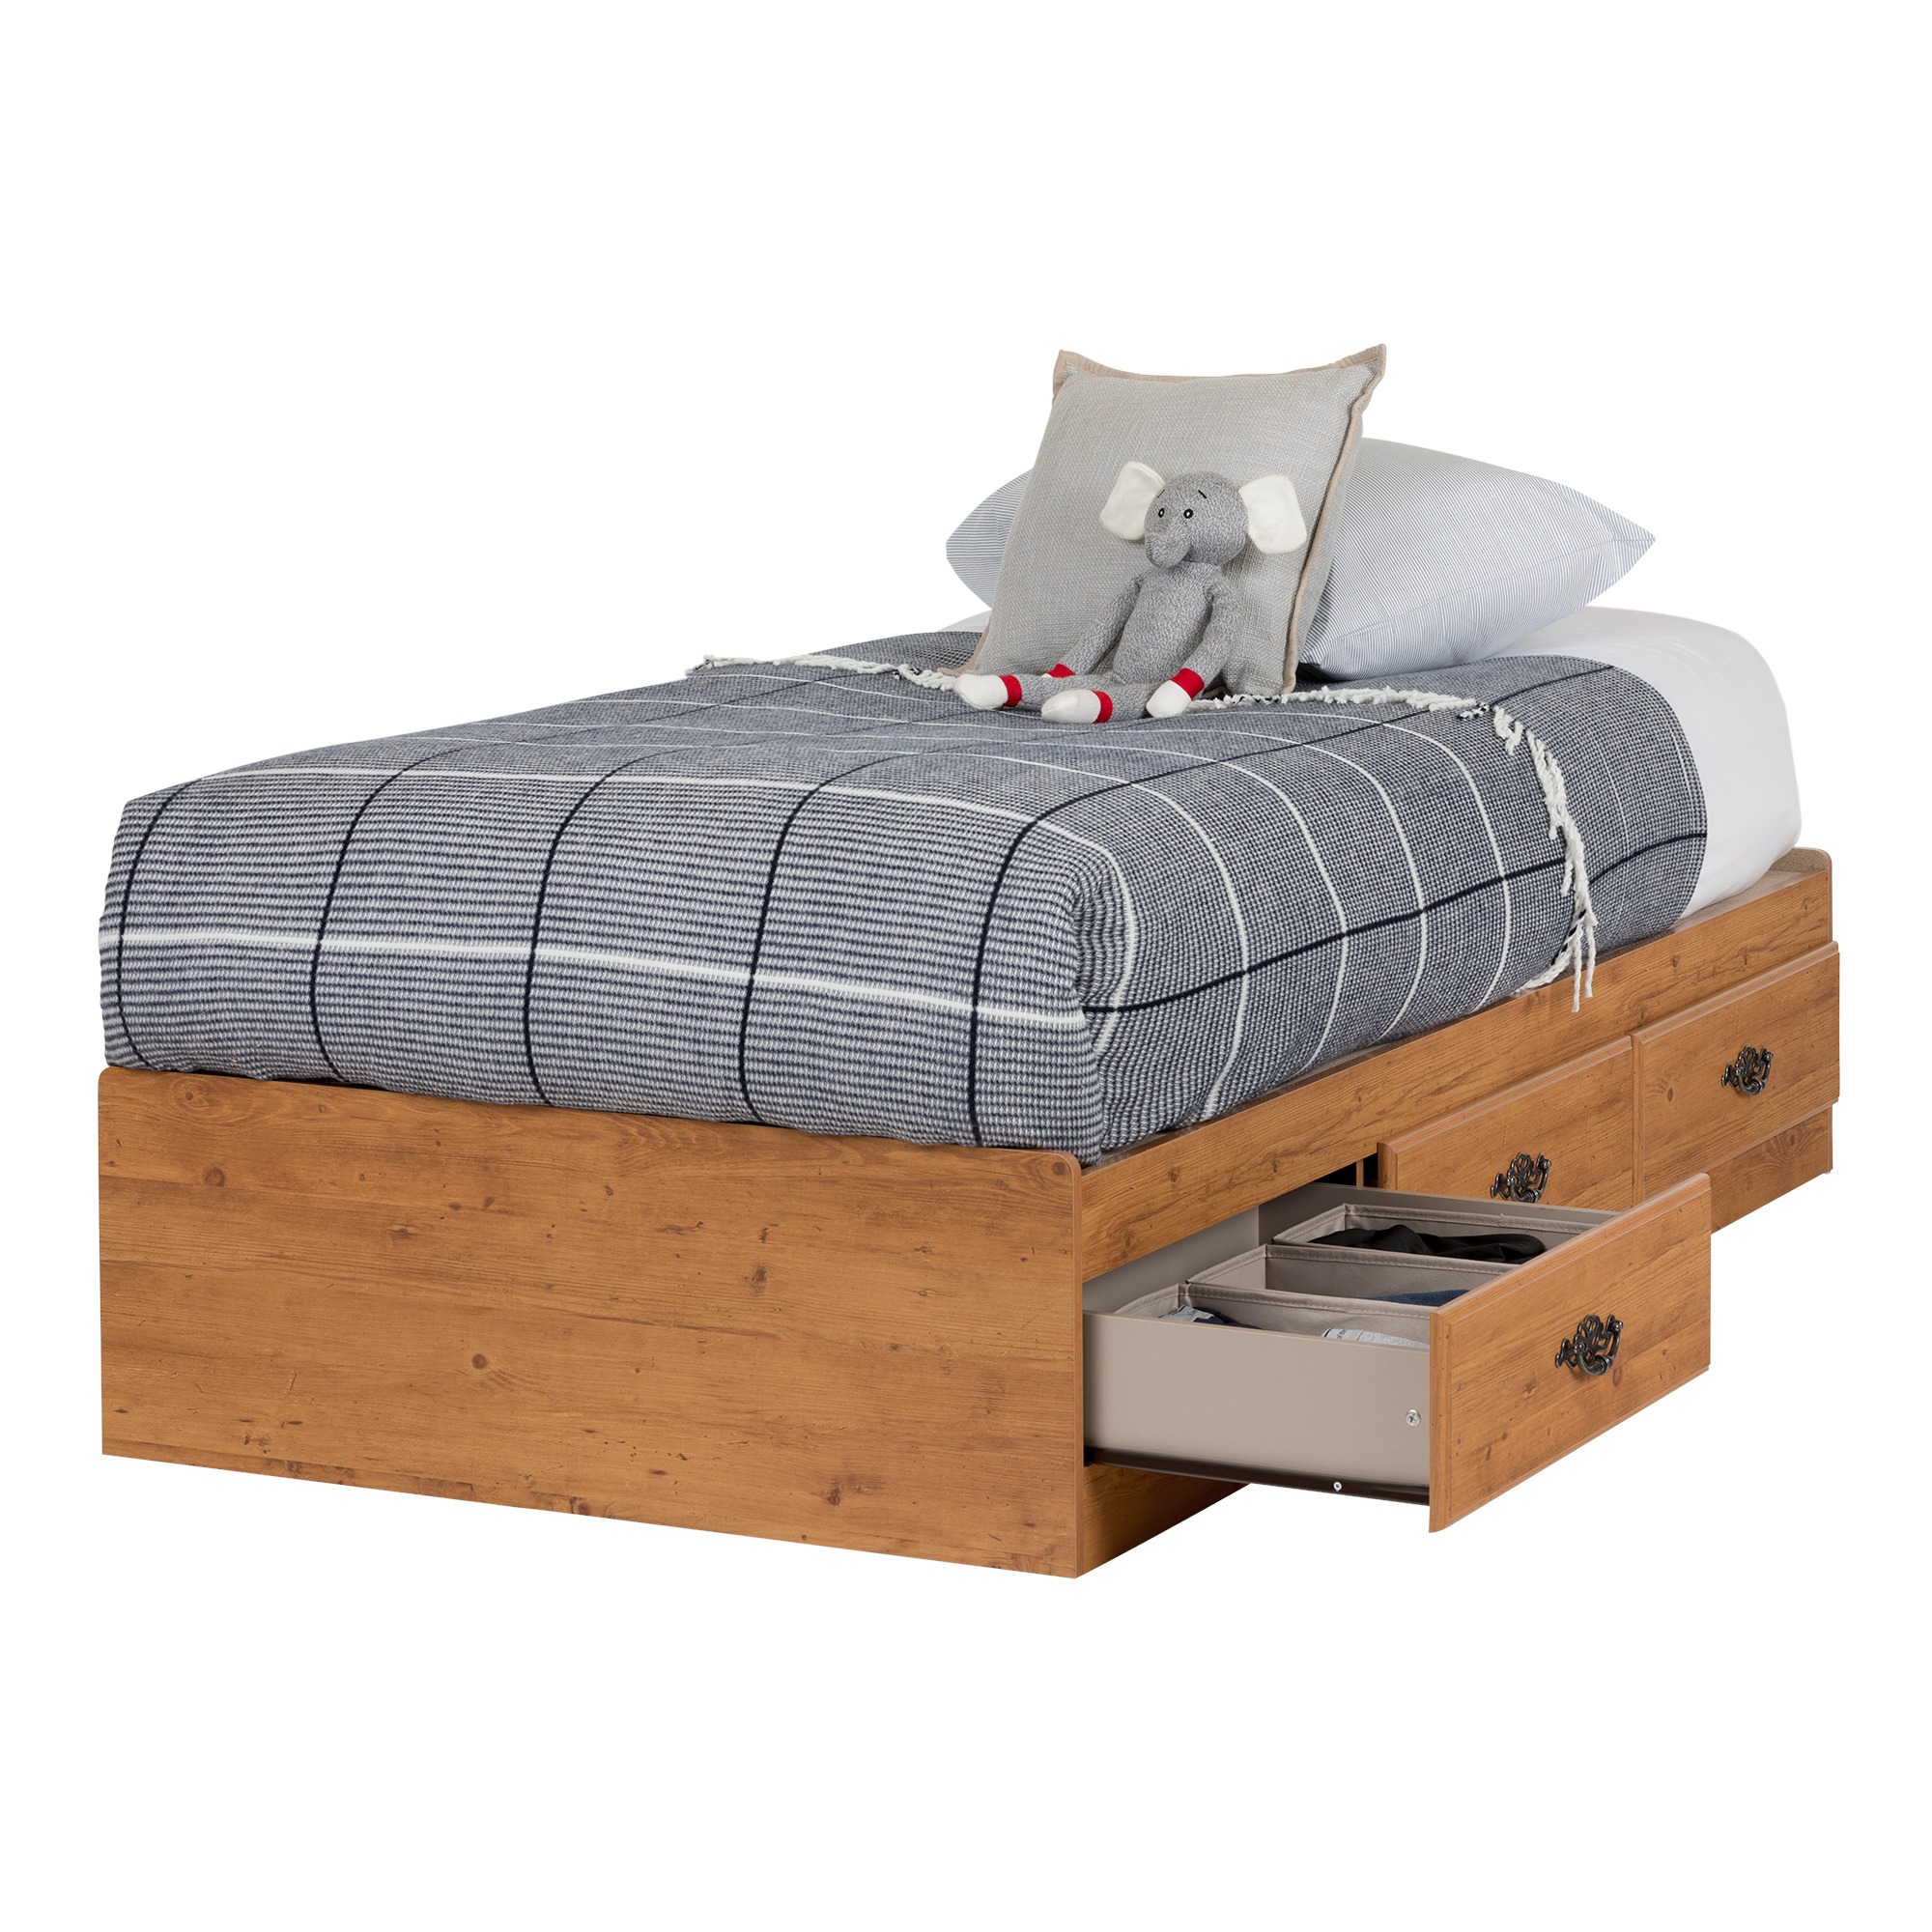 South Shore Prairie Twin Mates Bed with 3 Drawers in Country Pine